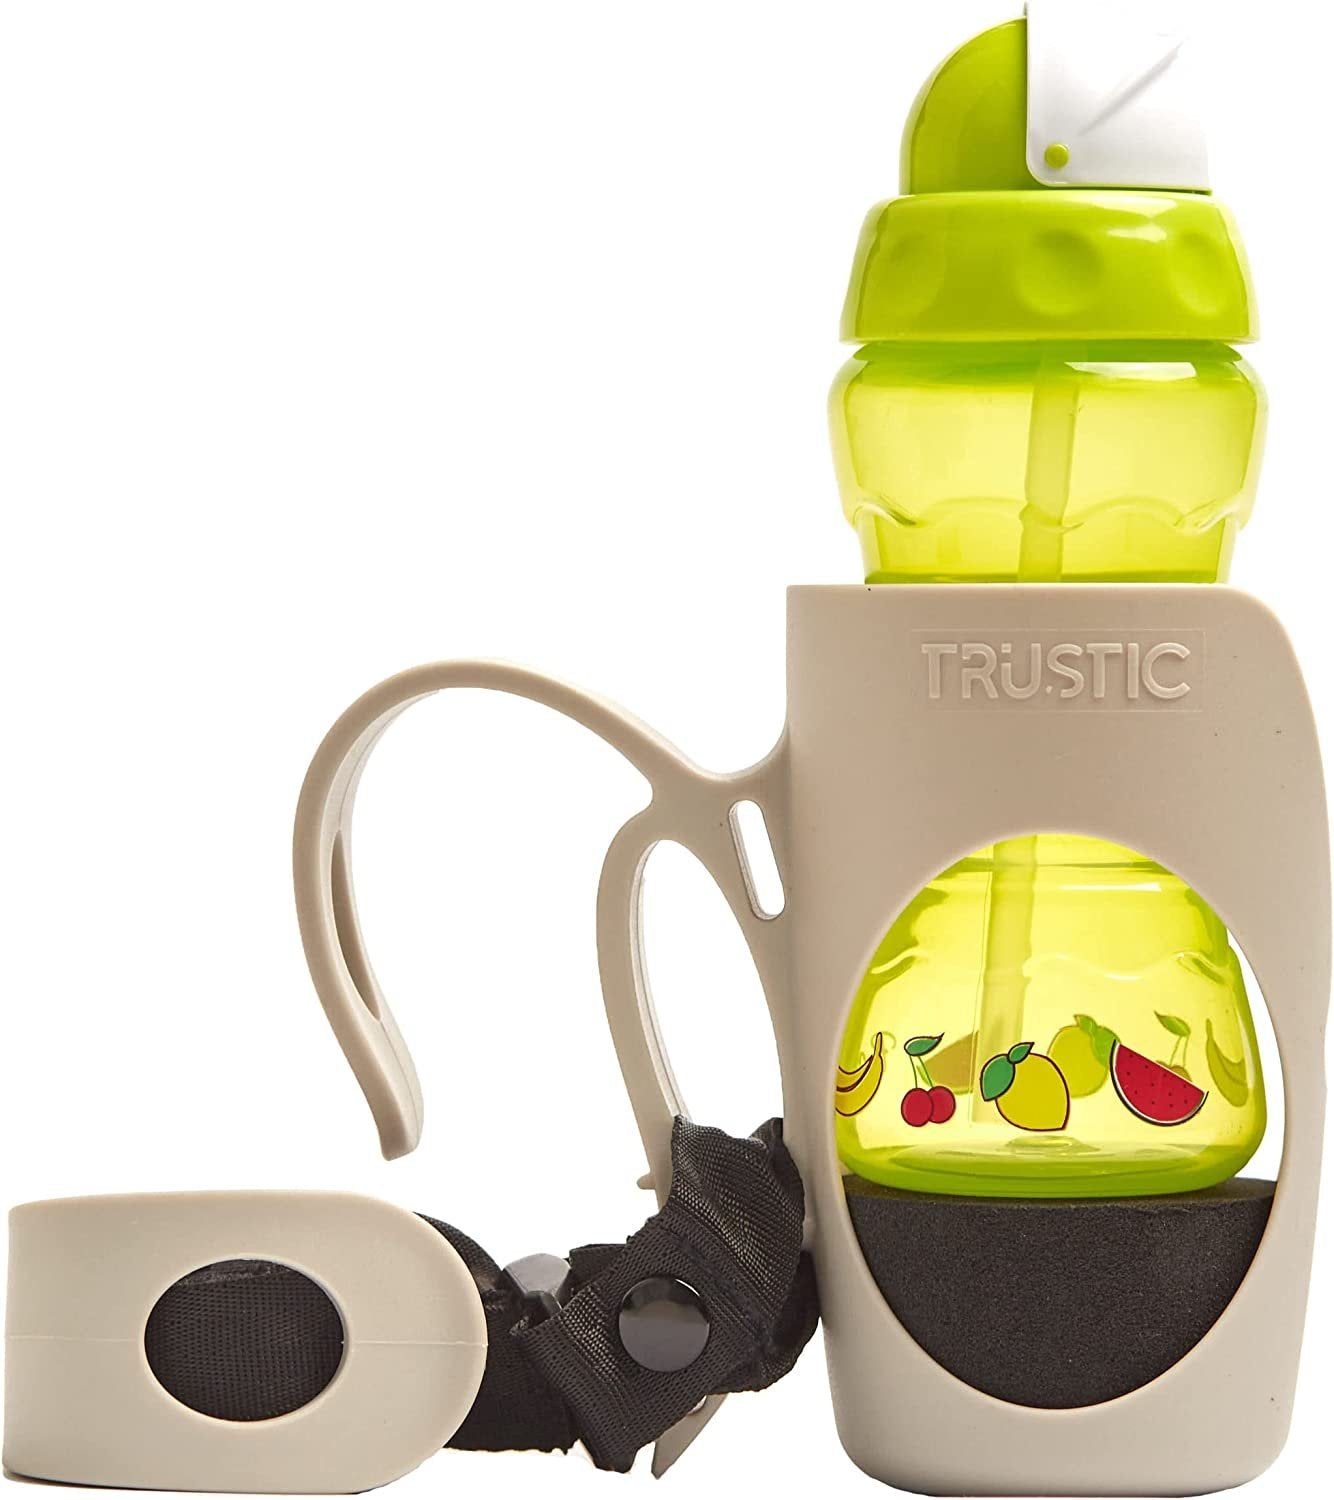 Trustic - Child Cup Holder for Convertible Car Seats - Compatible with The Majority of Car Seat Models